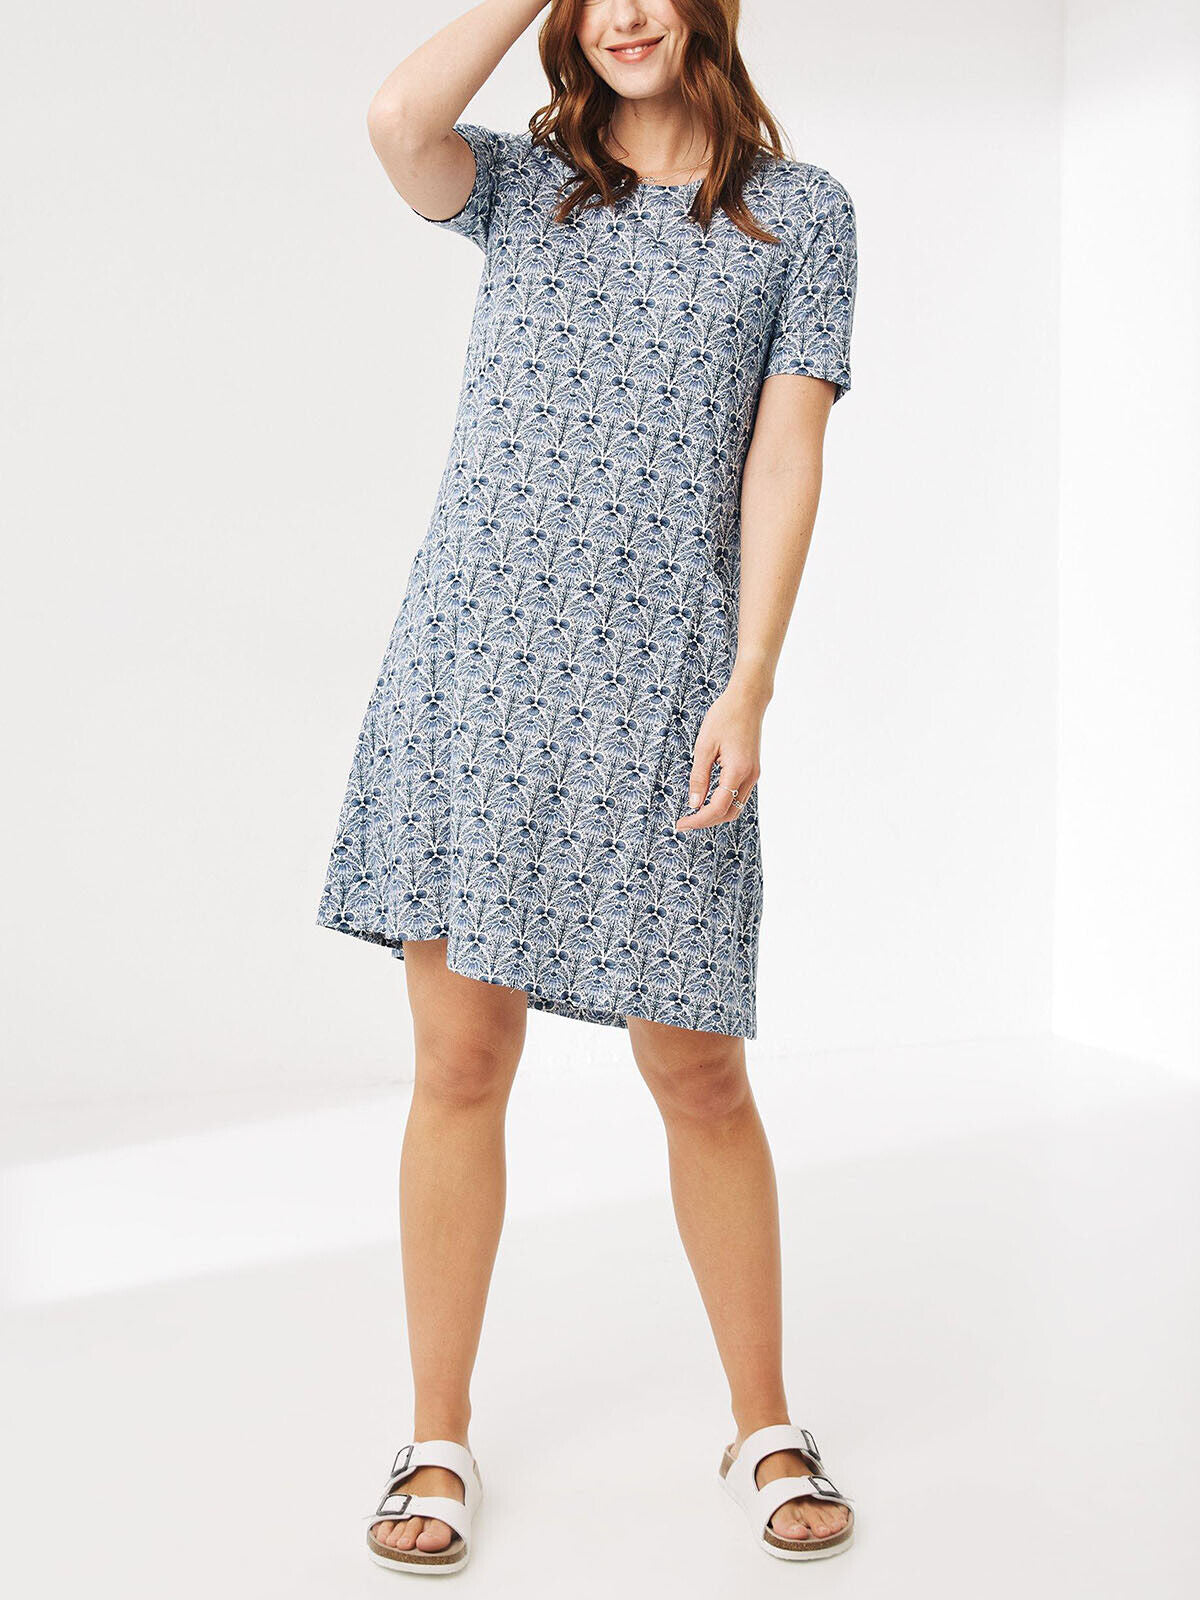 EX Fat Face Mid Blue Simone Sea Floral Jersey Dress in Sizes 8-24 RRP £46